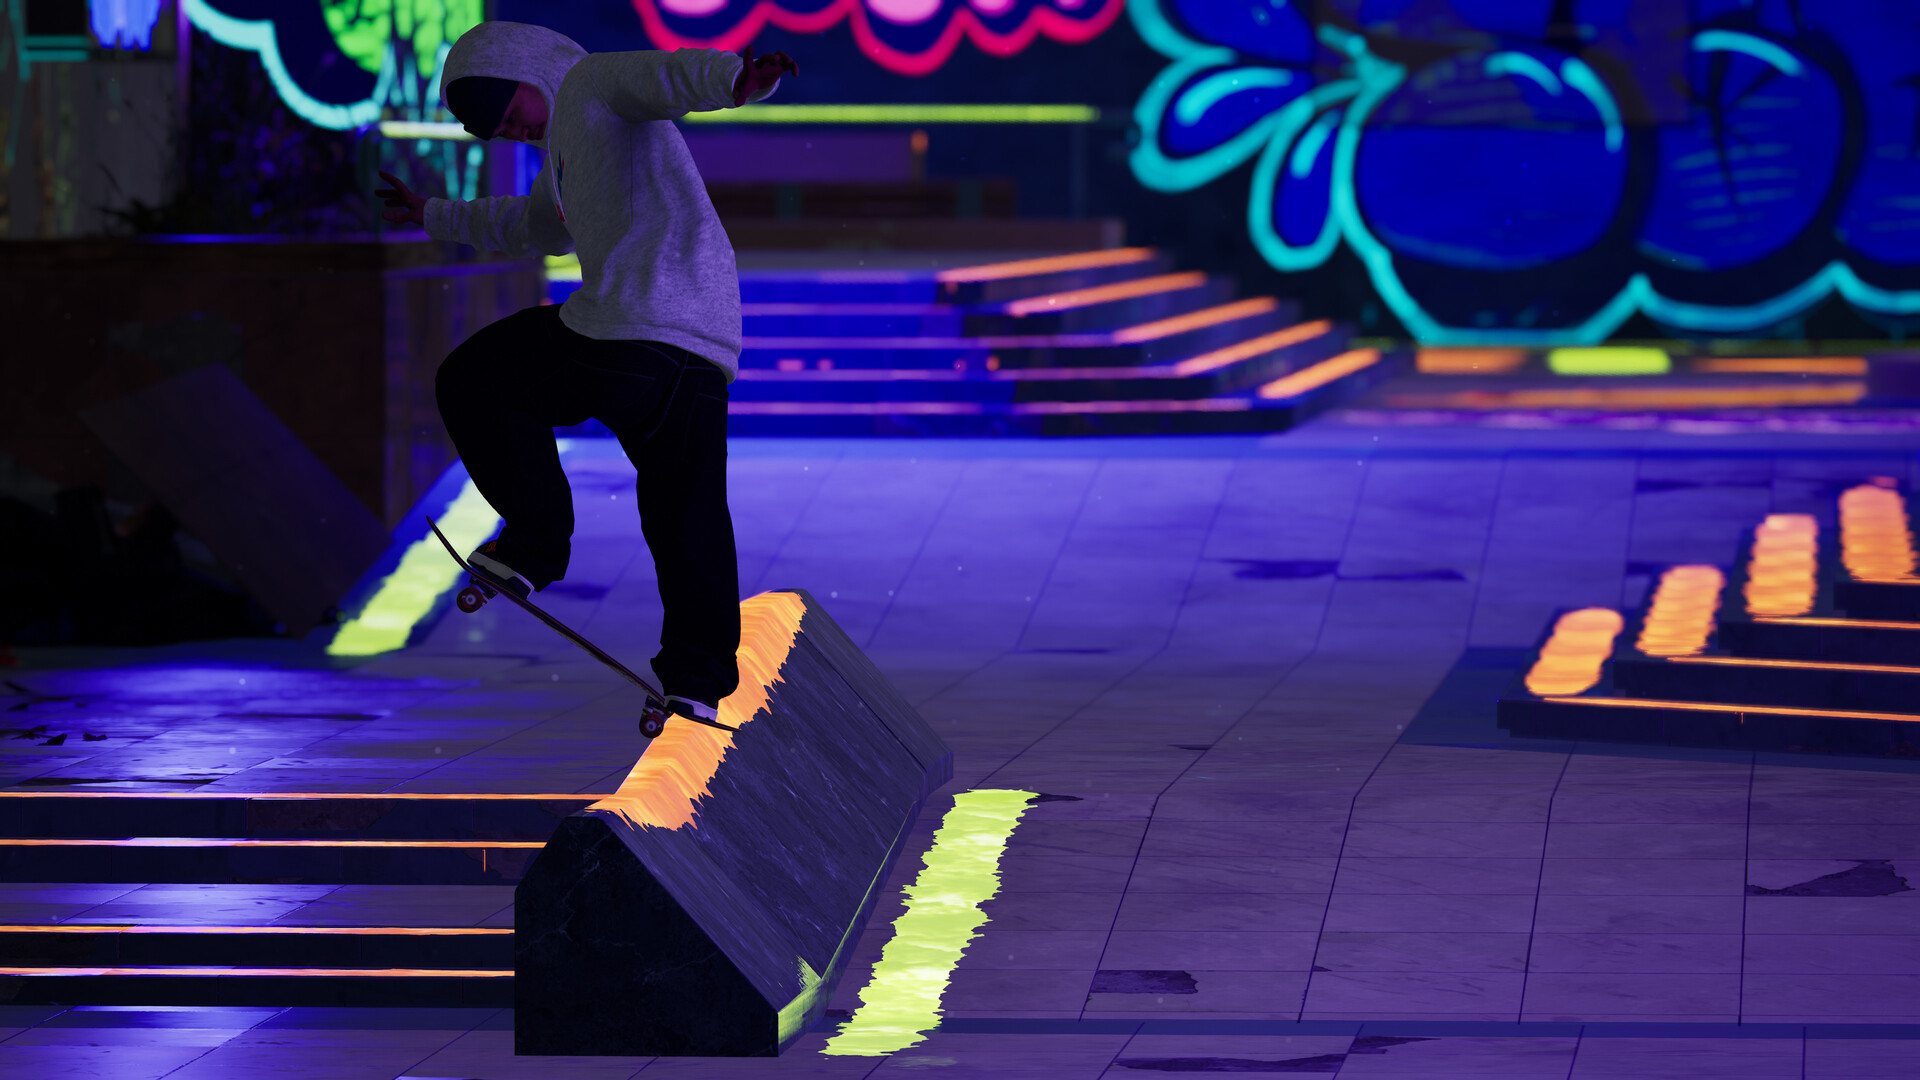 Session: Skate Sim Abandoned Mall on Steam